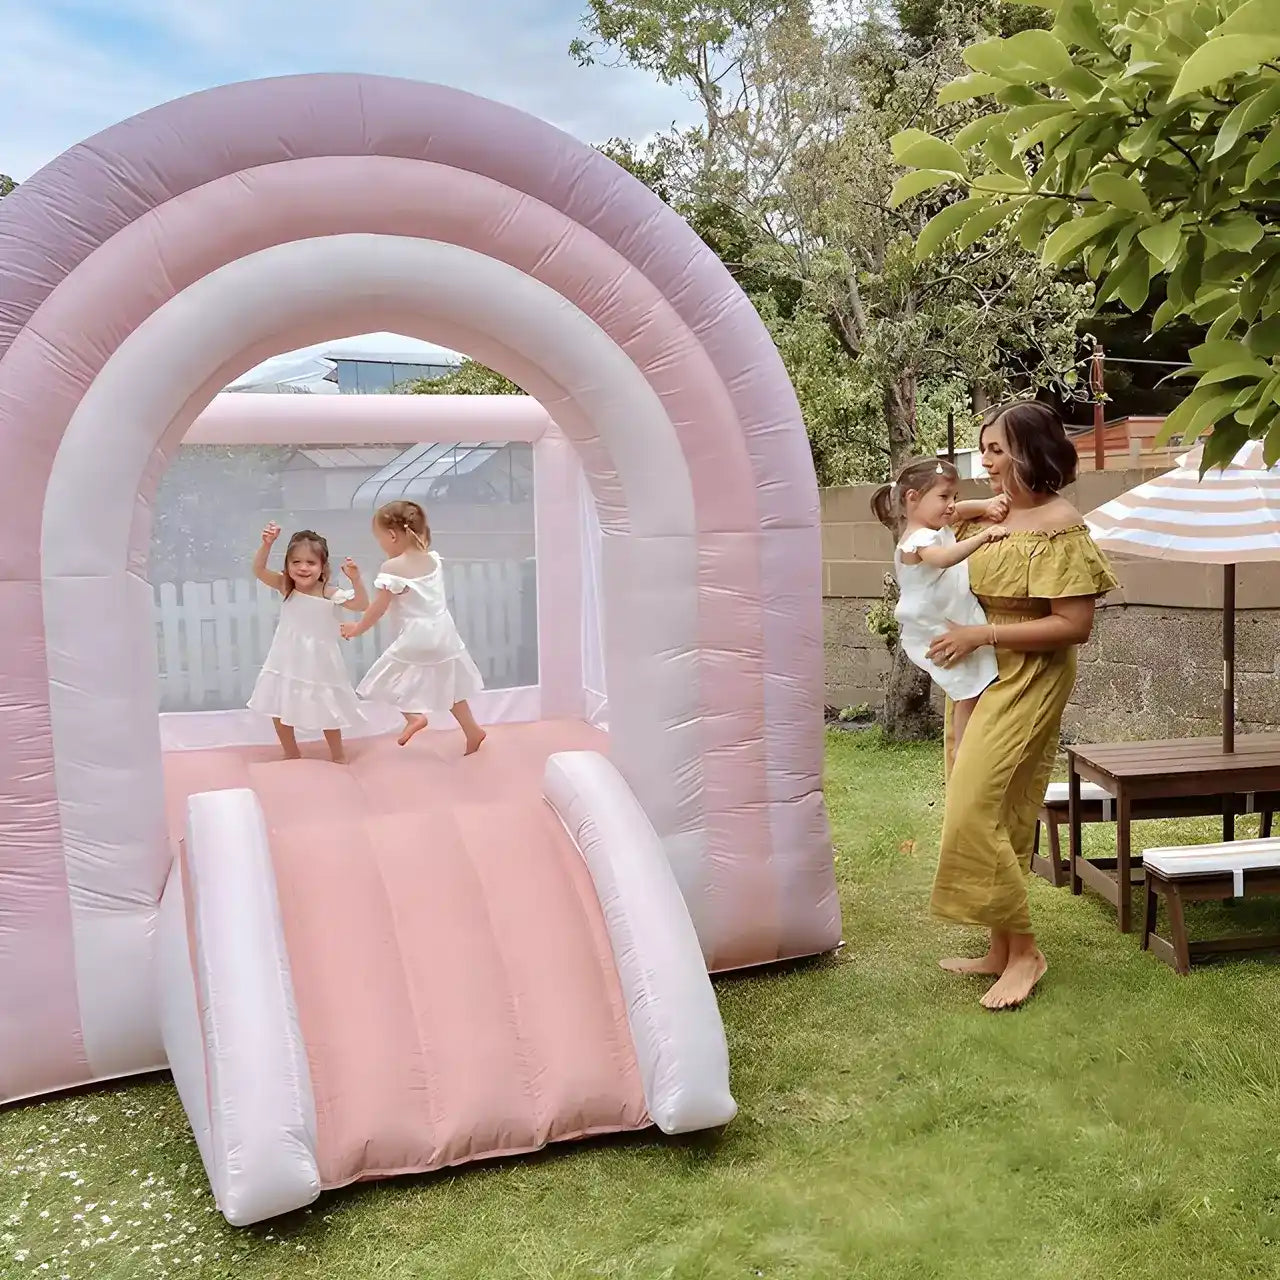 Best pink bounce castle for moms and kids